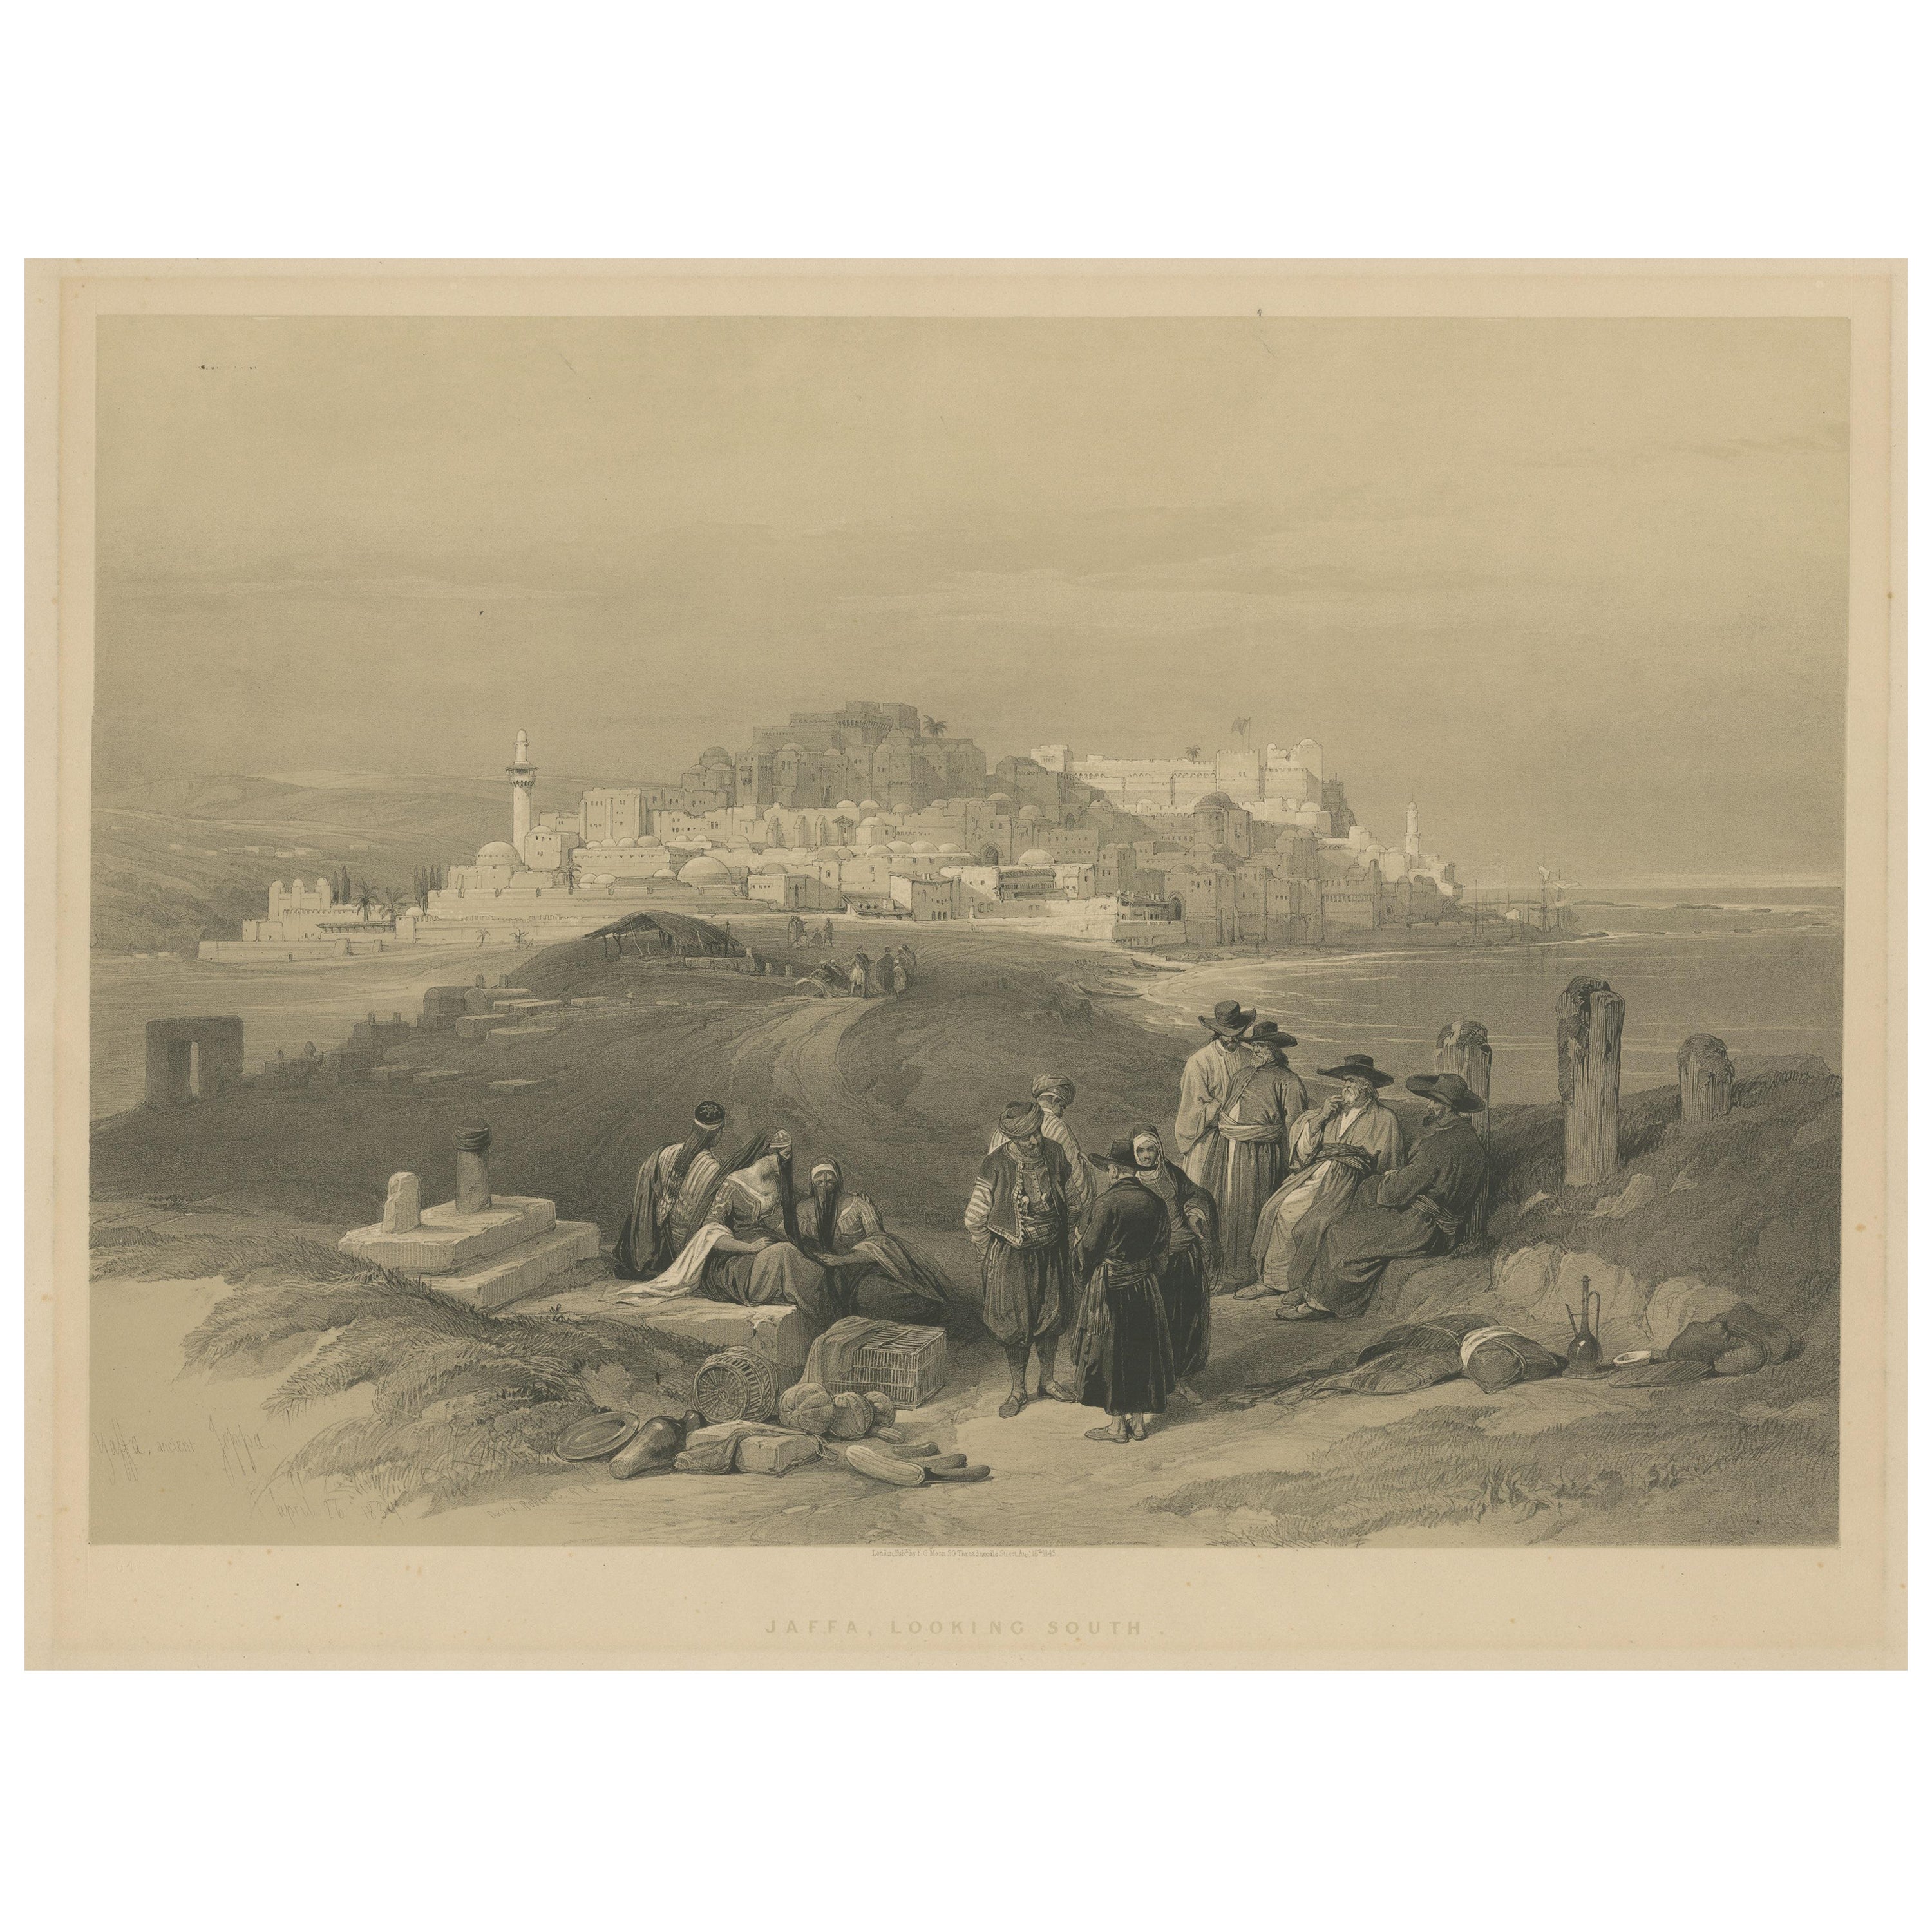 Tinted lithograph of the City of Jaffa